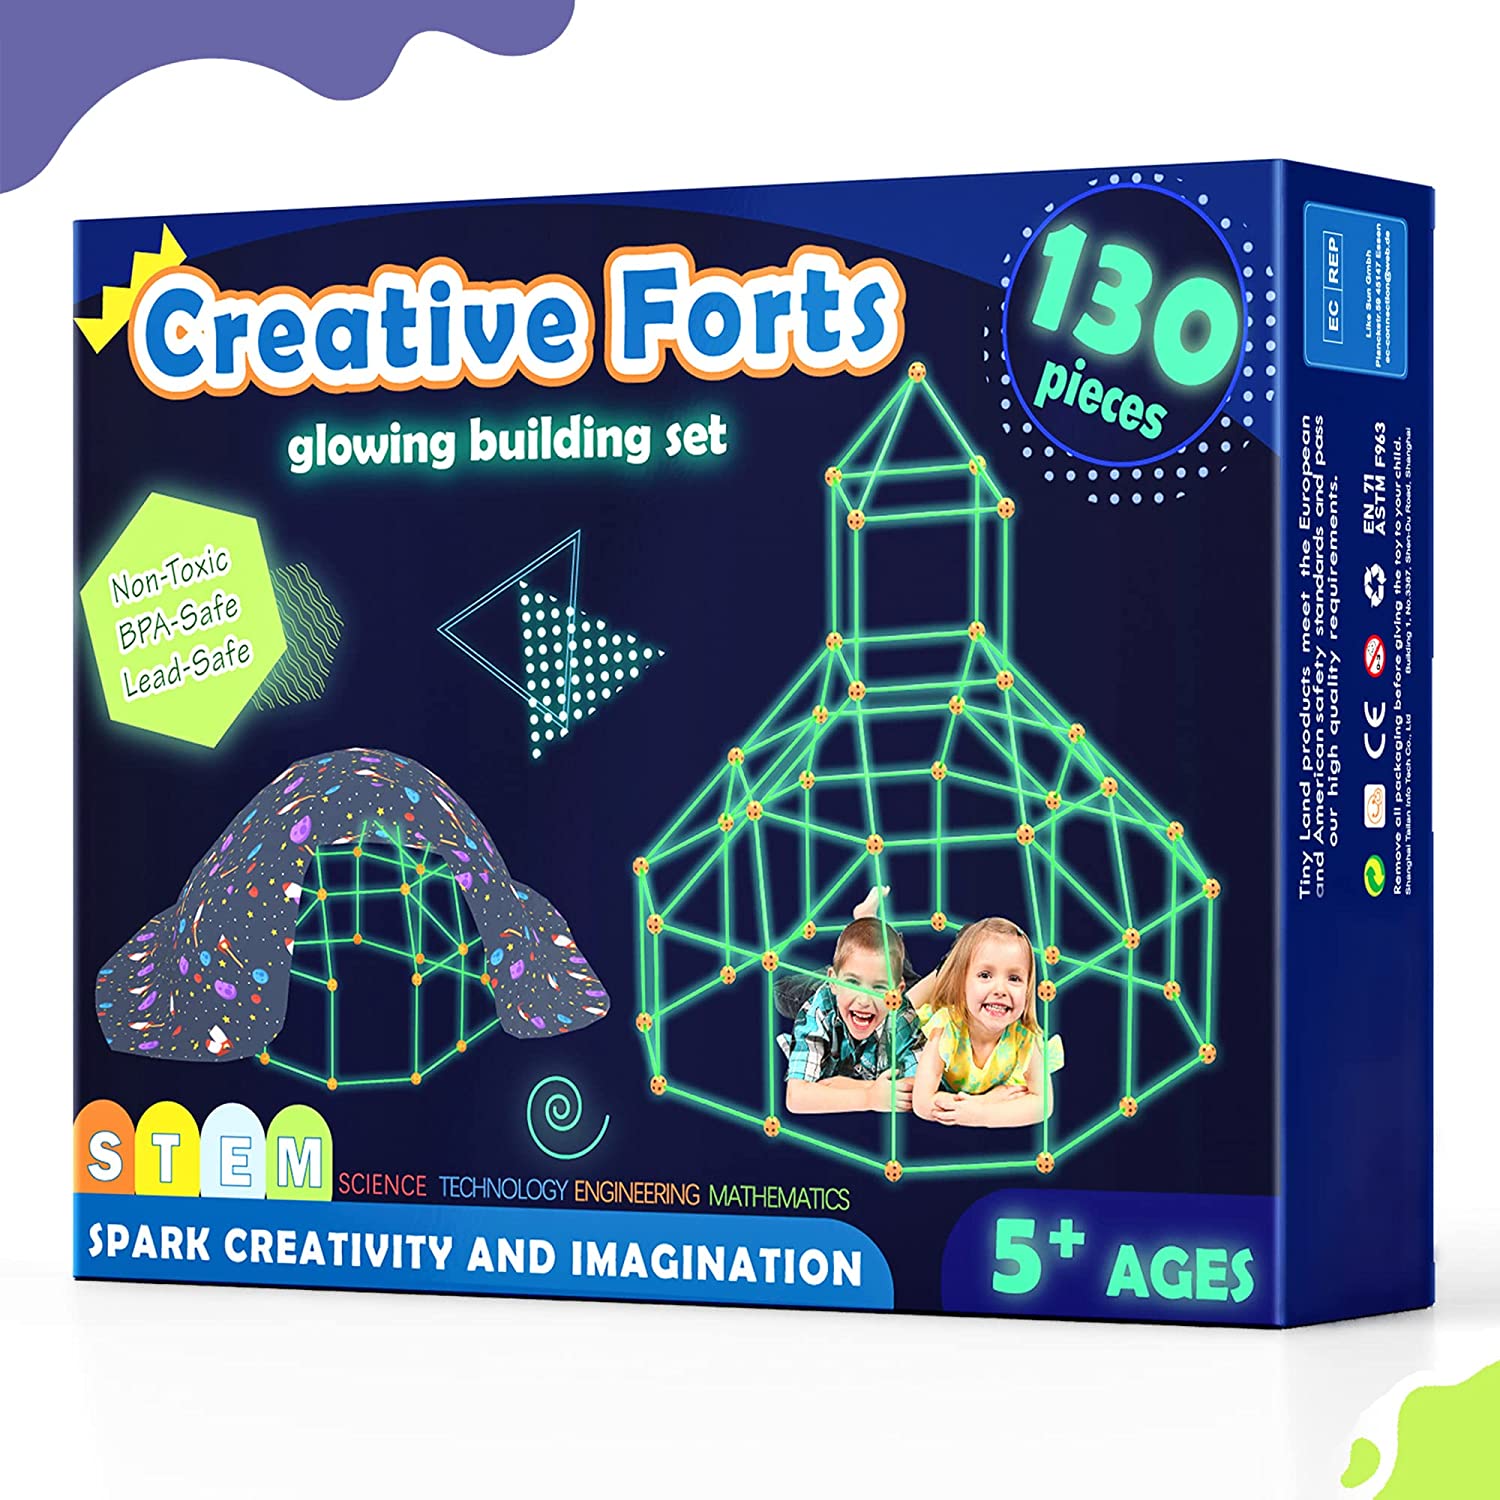  ERONE Fort Building Kit for Kids,158pcs Forts Construction  Builder Gift Toys for Boys and Girls Fort Building Set Play Tent Rocket  Castle Indoor Outdoor : Toys & Games